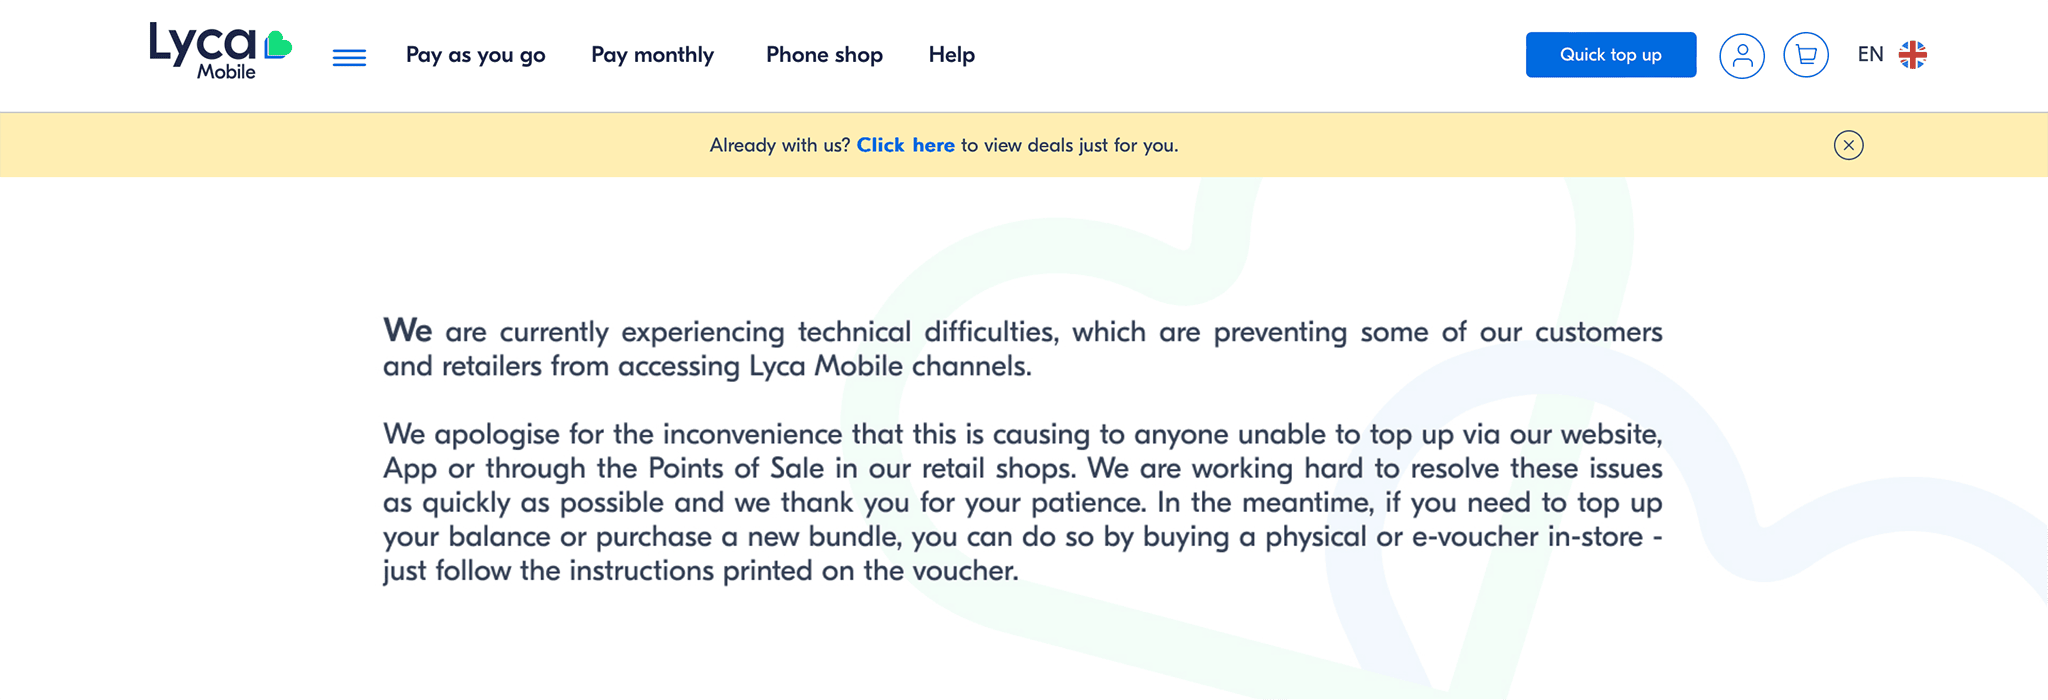 LycaMobile website down